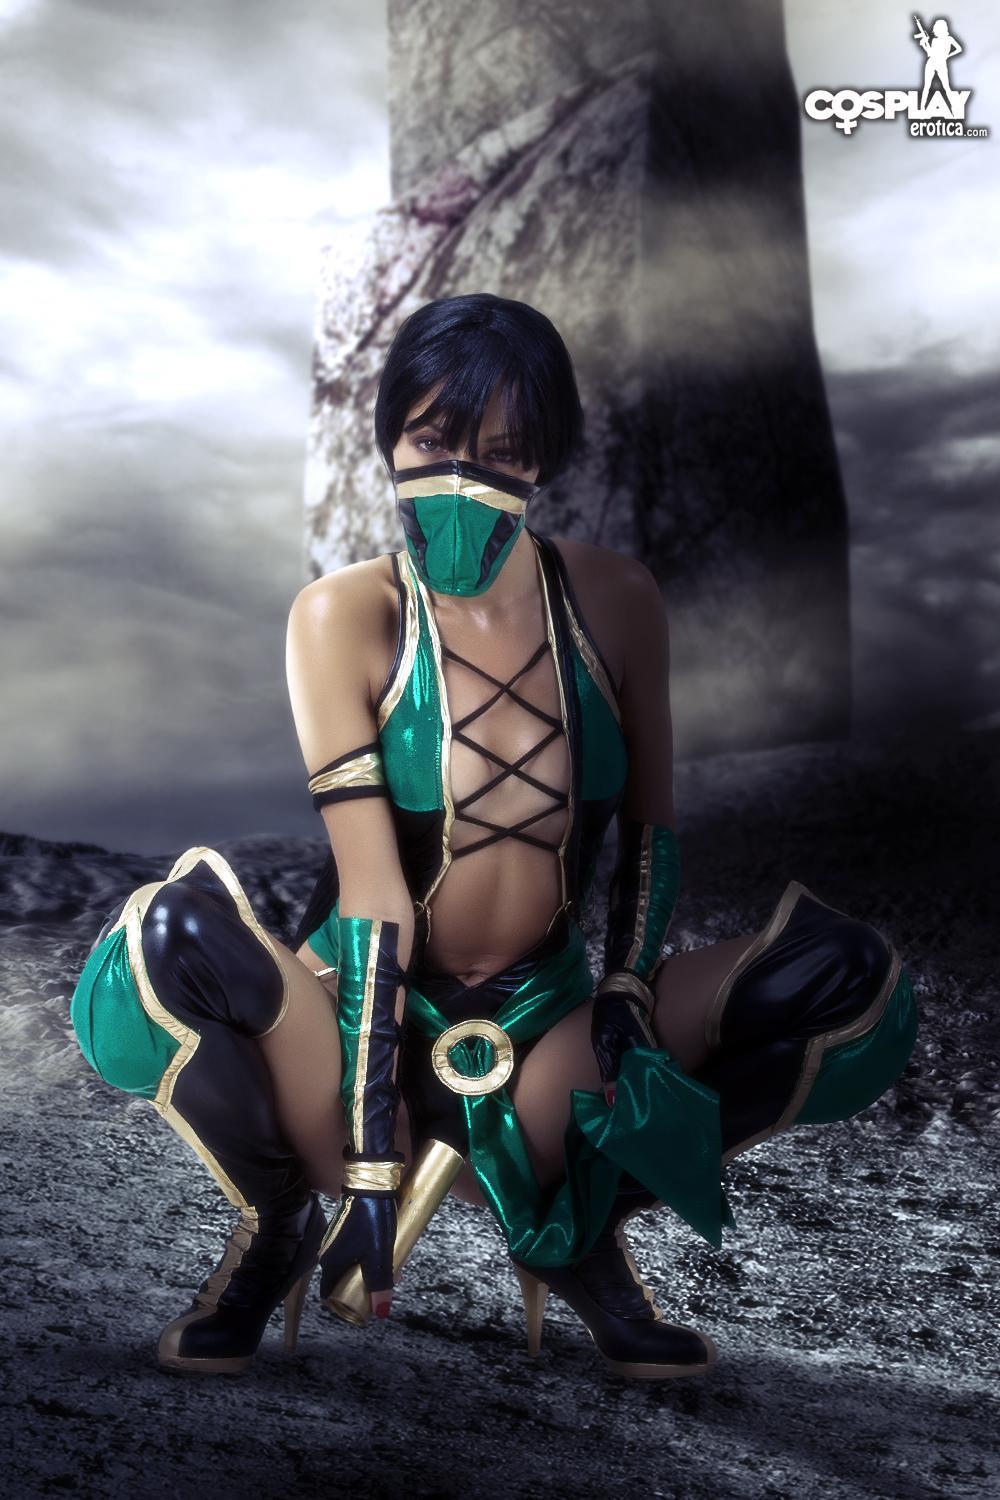 Cosplay babe Brownie dresses as a super hot Jade from Mortal Kombat #53563605